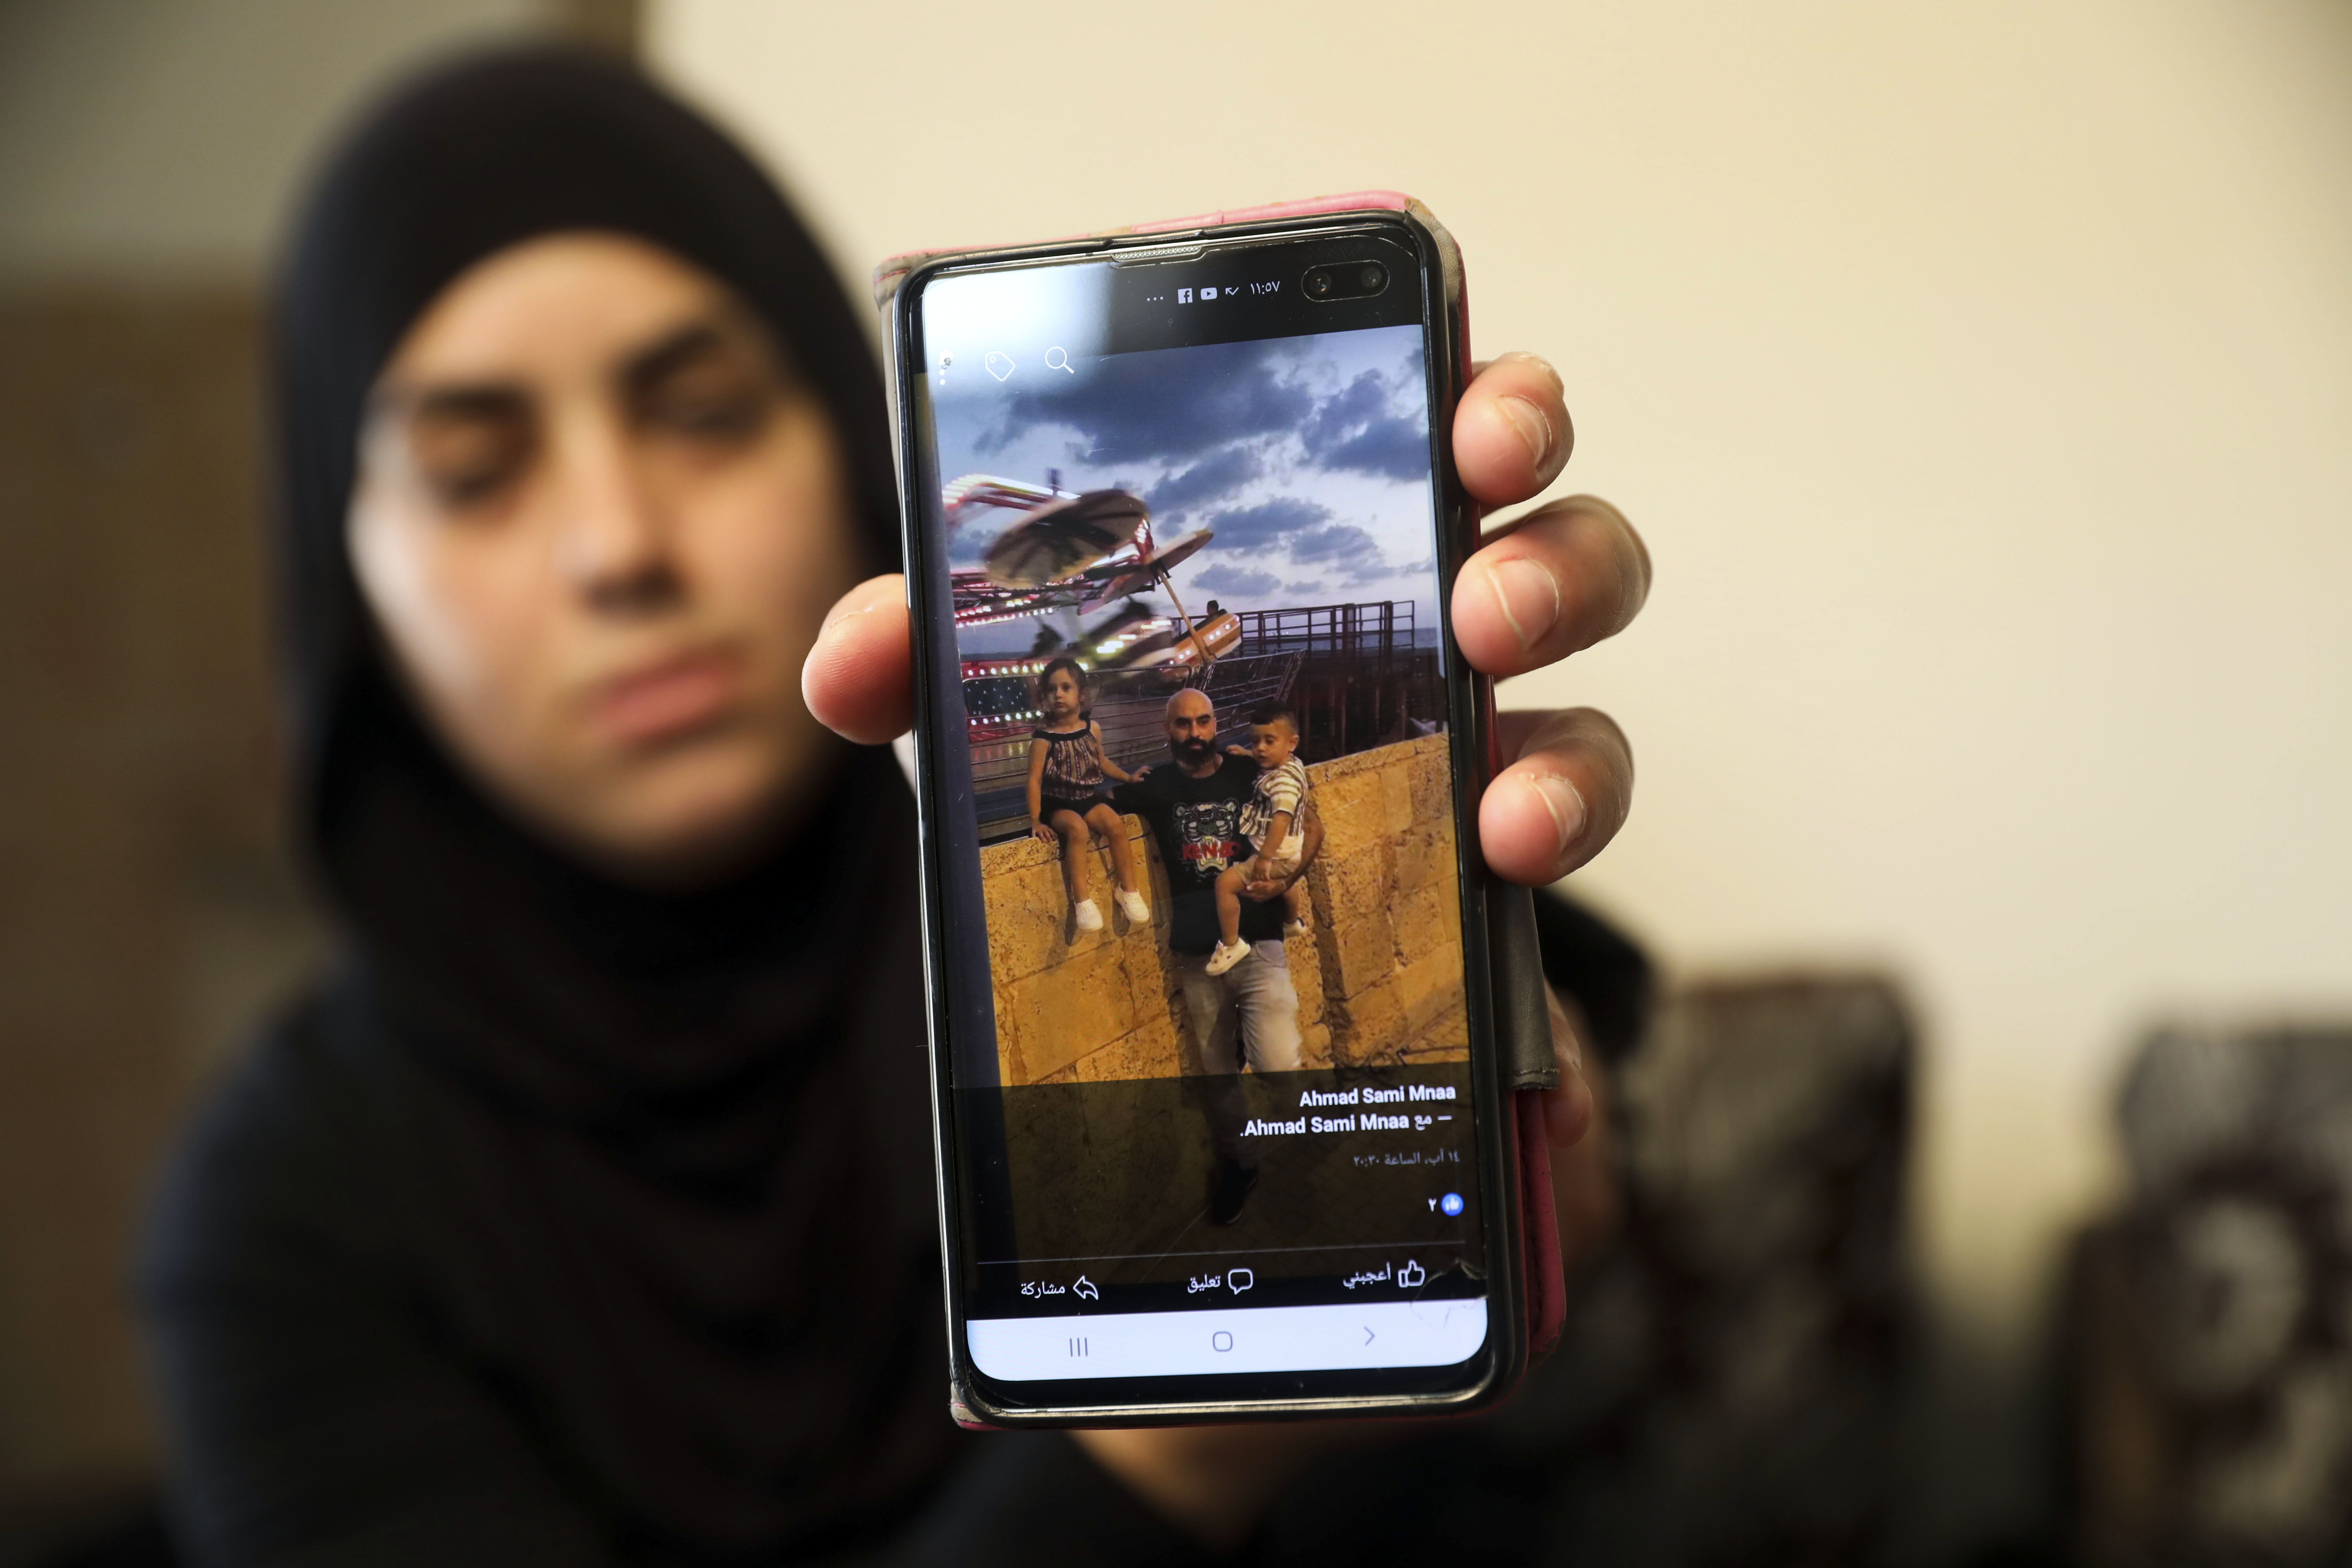 An Israeli Arab woman shows a photo of her dead brother, one of two of her siblings recently killed in a midday shootout in Majd al-Krum.  According to the Associated Press, “a wave of violent crime in Israel’s Arab communities has exposed the longstanding mistrust between the marginalized community and Israeli authorities.”